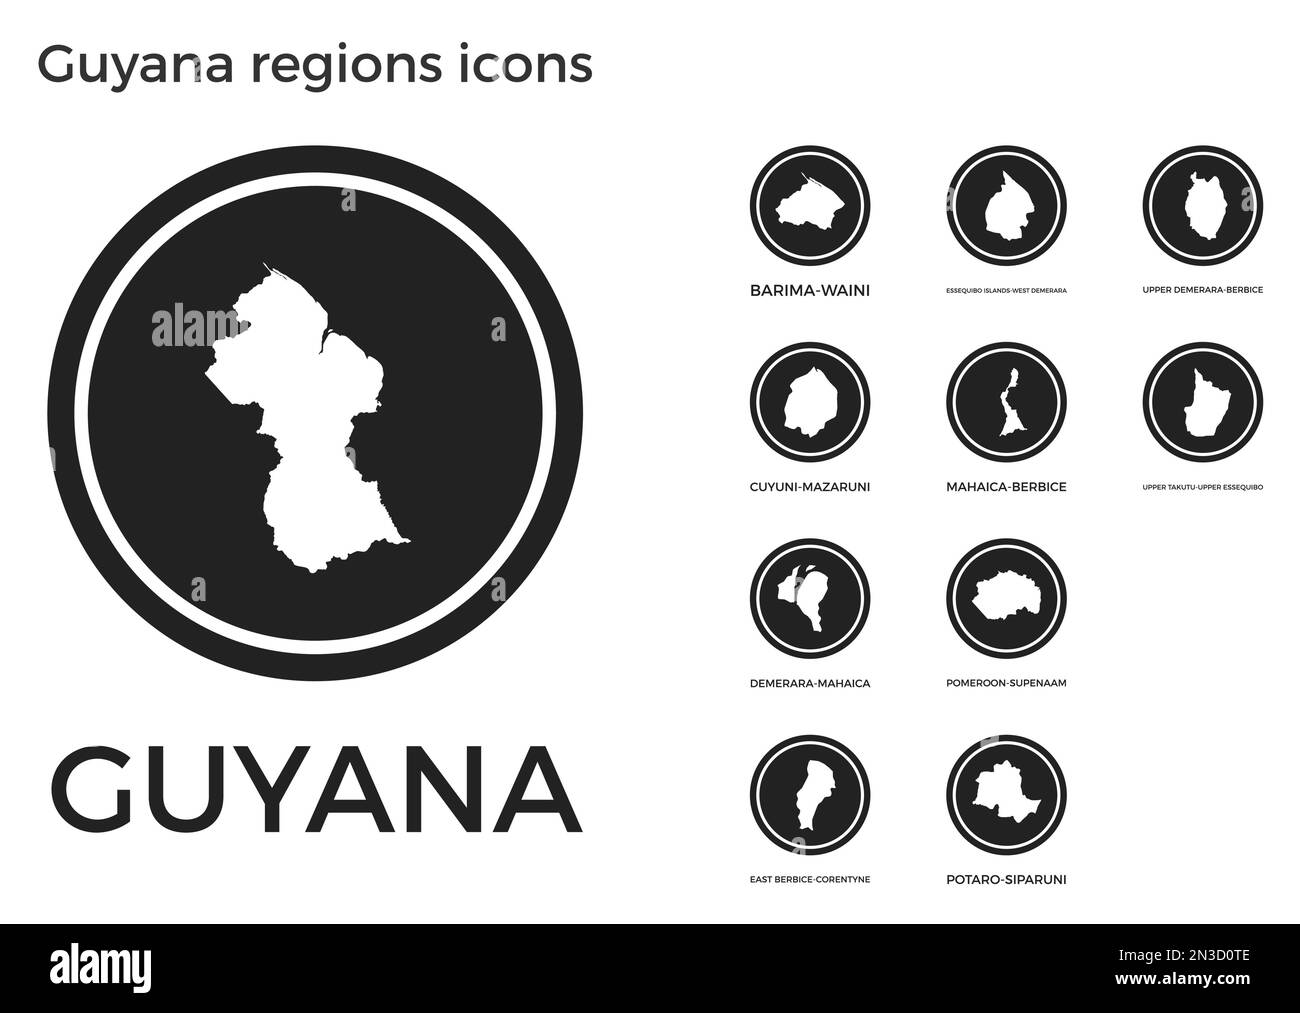 Guyana regions icons. Black round logos with country regions maps and titles. Vector illustration. Stock Vector